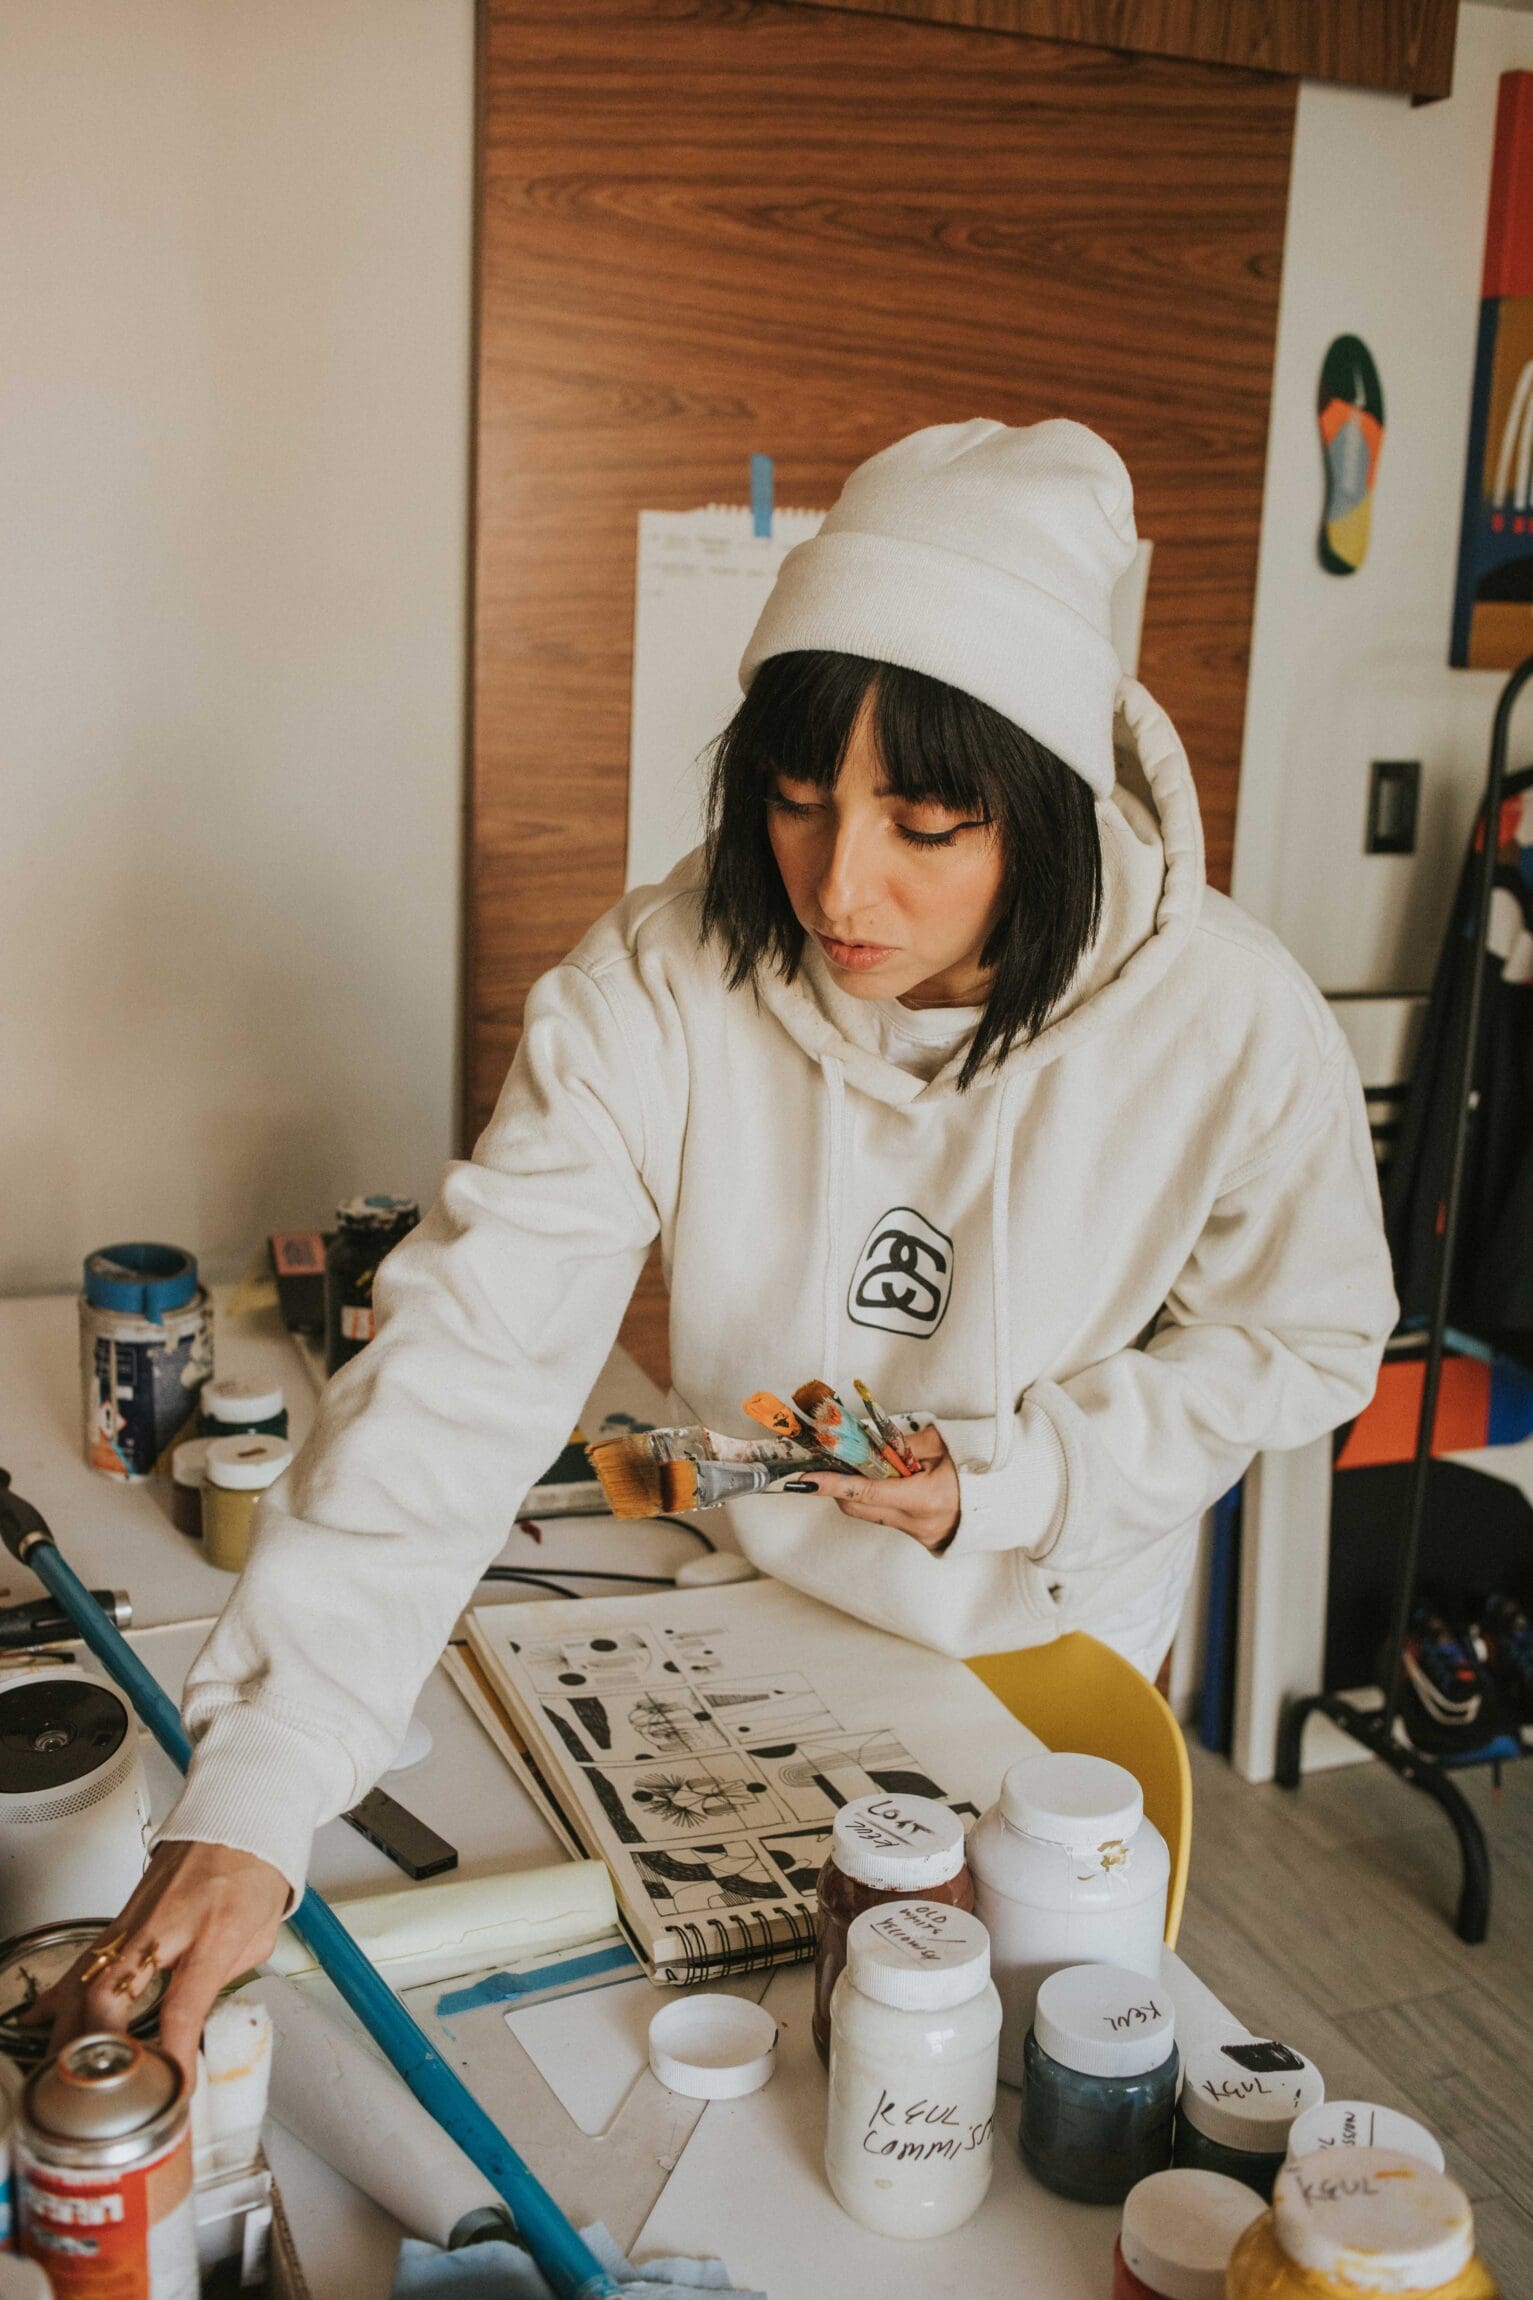 Artist Luisa Salas, aka Hola Lou, shot for ROADBOOK in her home studio, choosing paint colours on a worktop, with brushes in her hand.